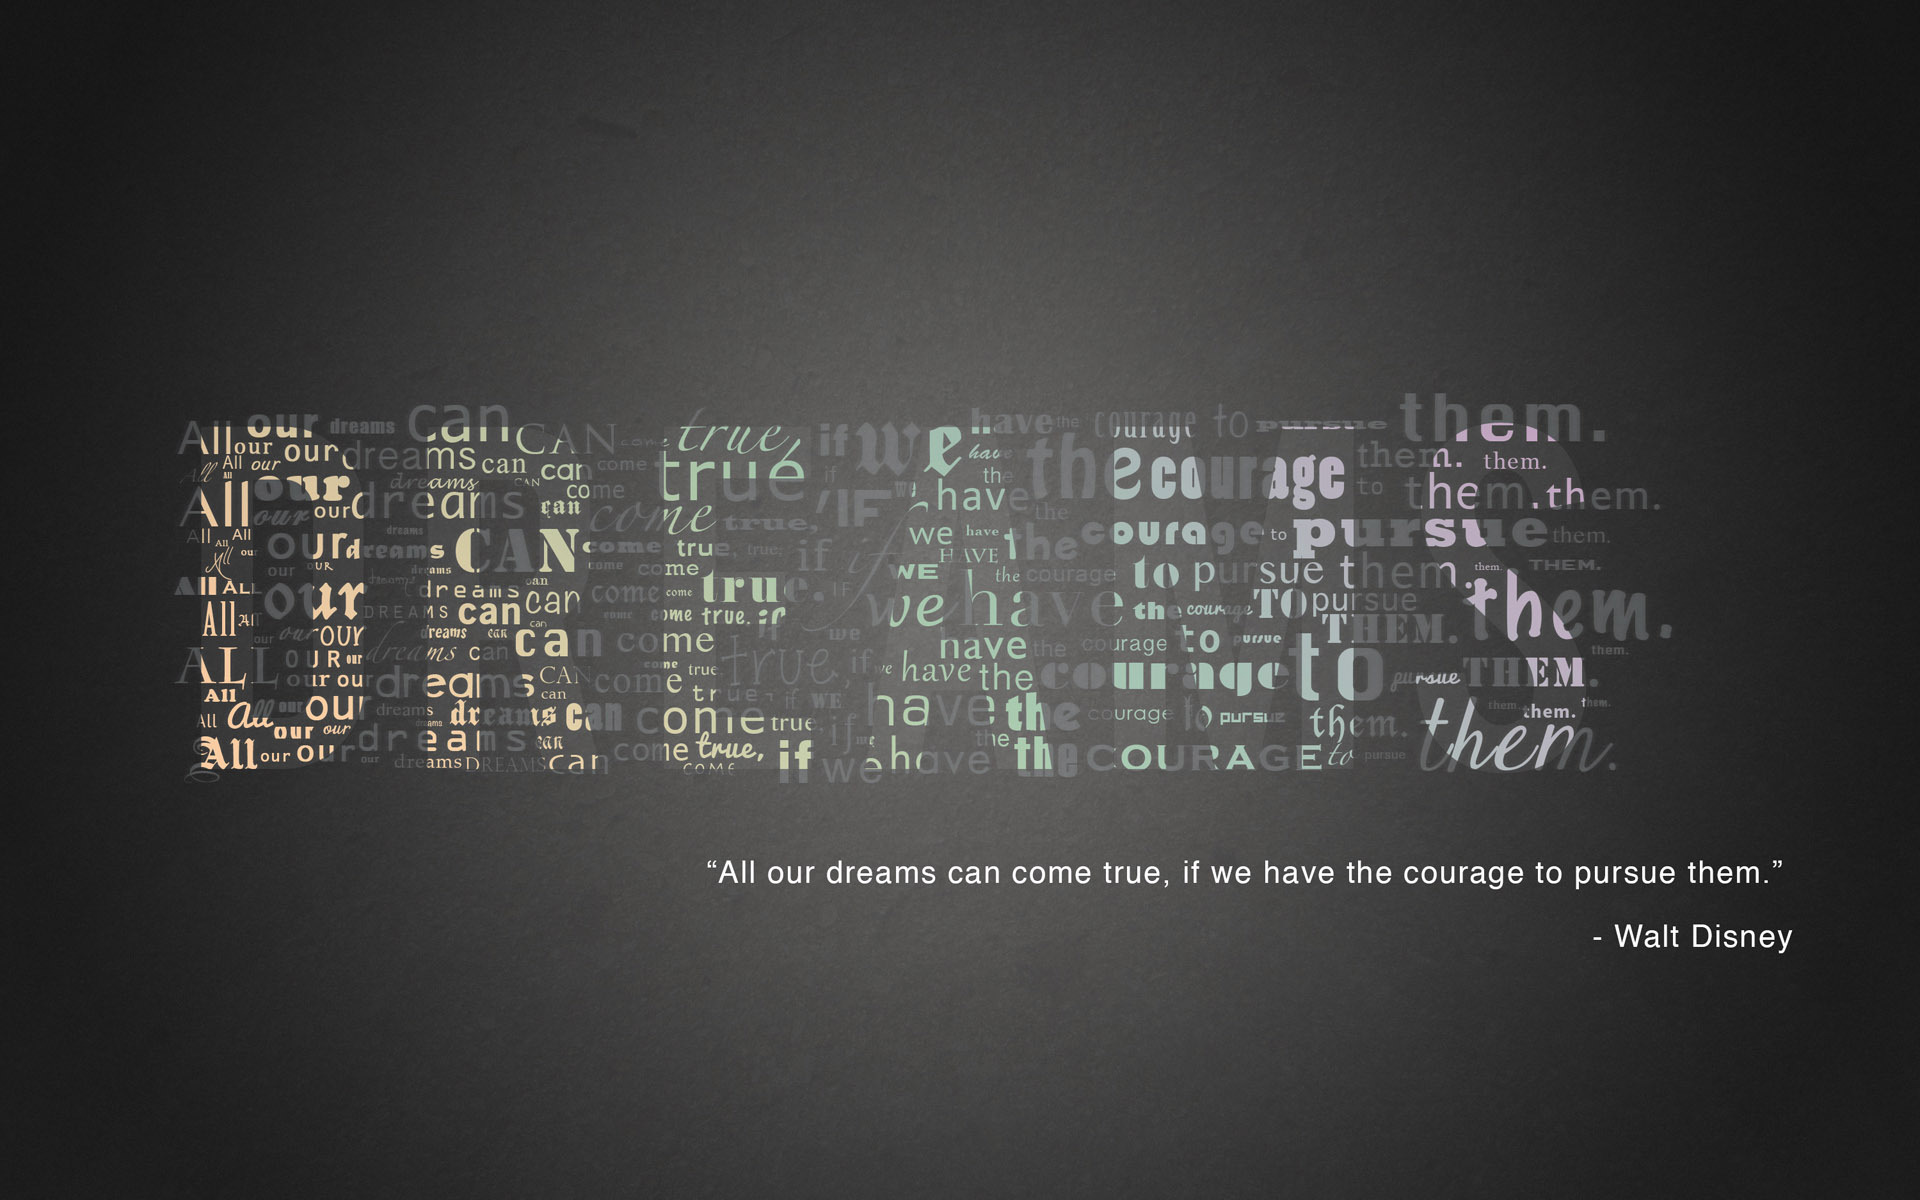 Quote Backgrounds free download | Wallpapers, Backgrounds, Images ...